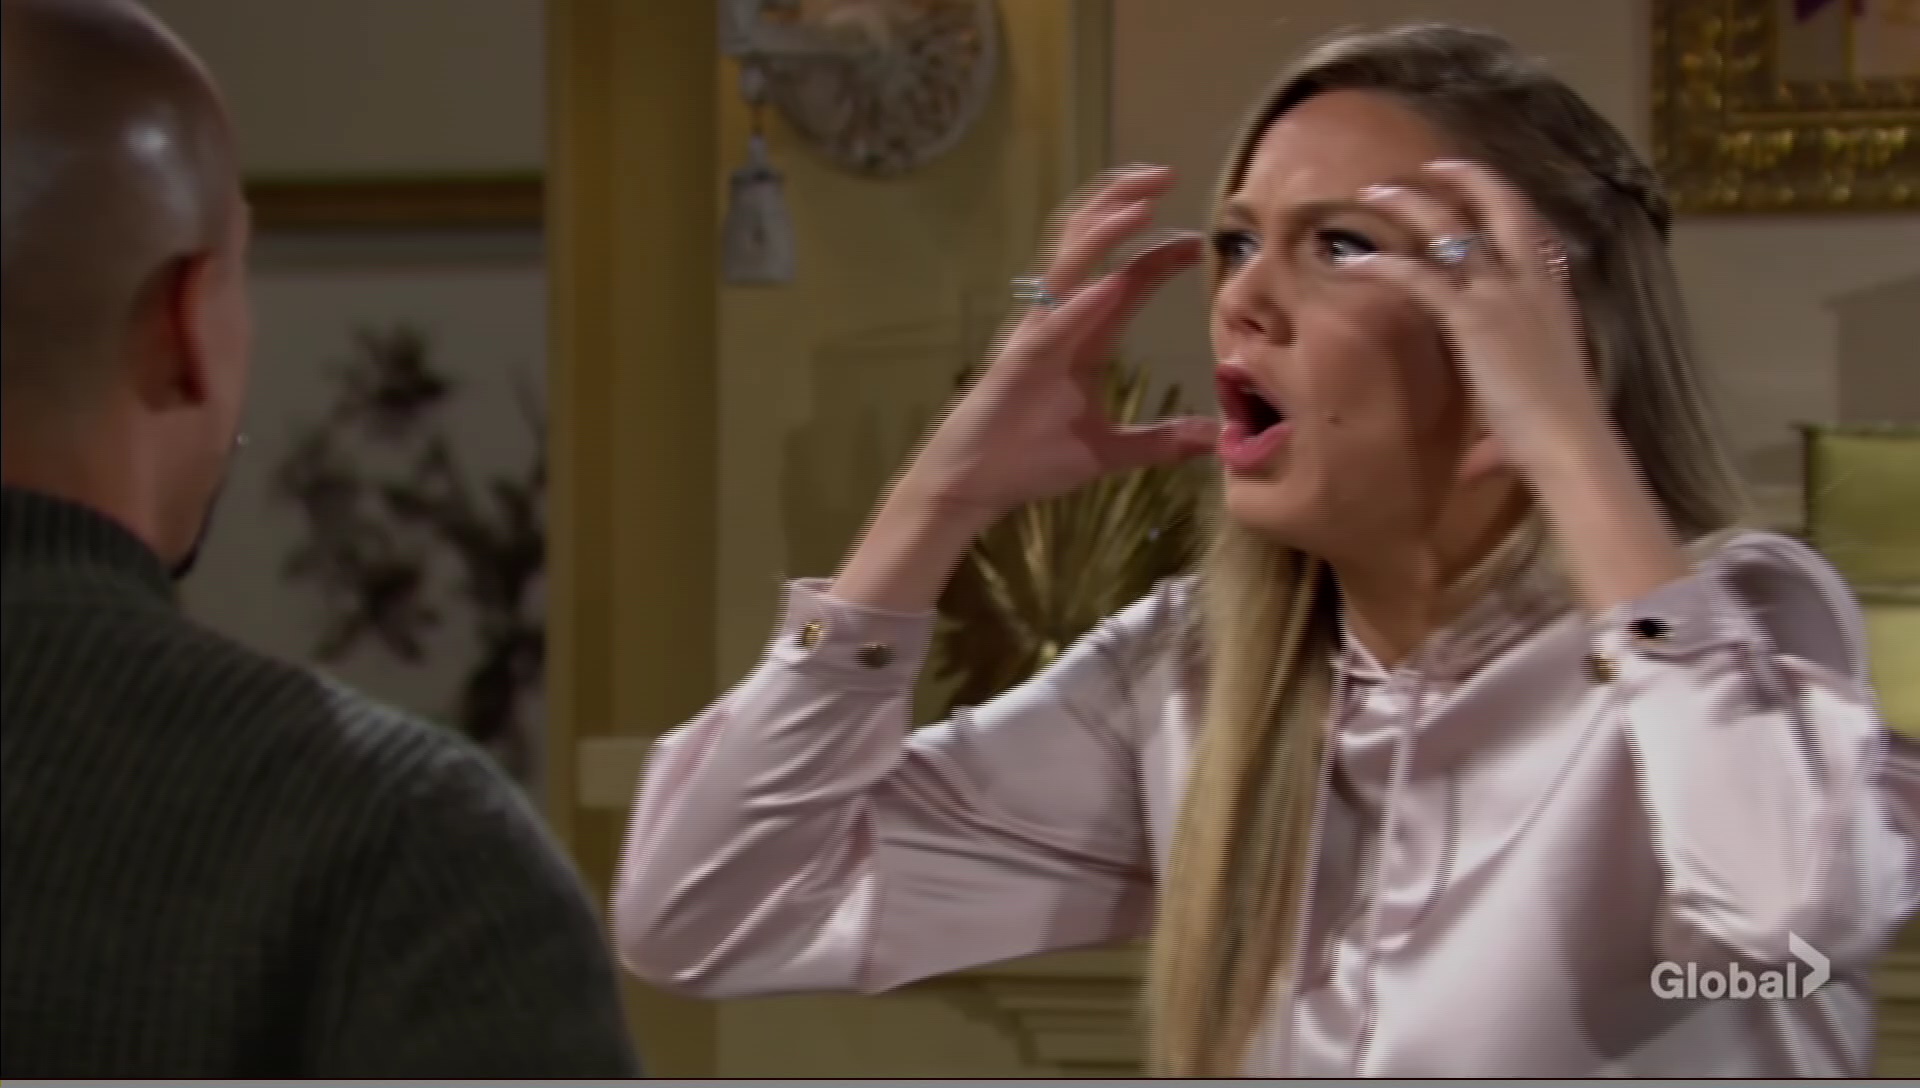 abby meltdown baby young restless soapsspoilers cbs